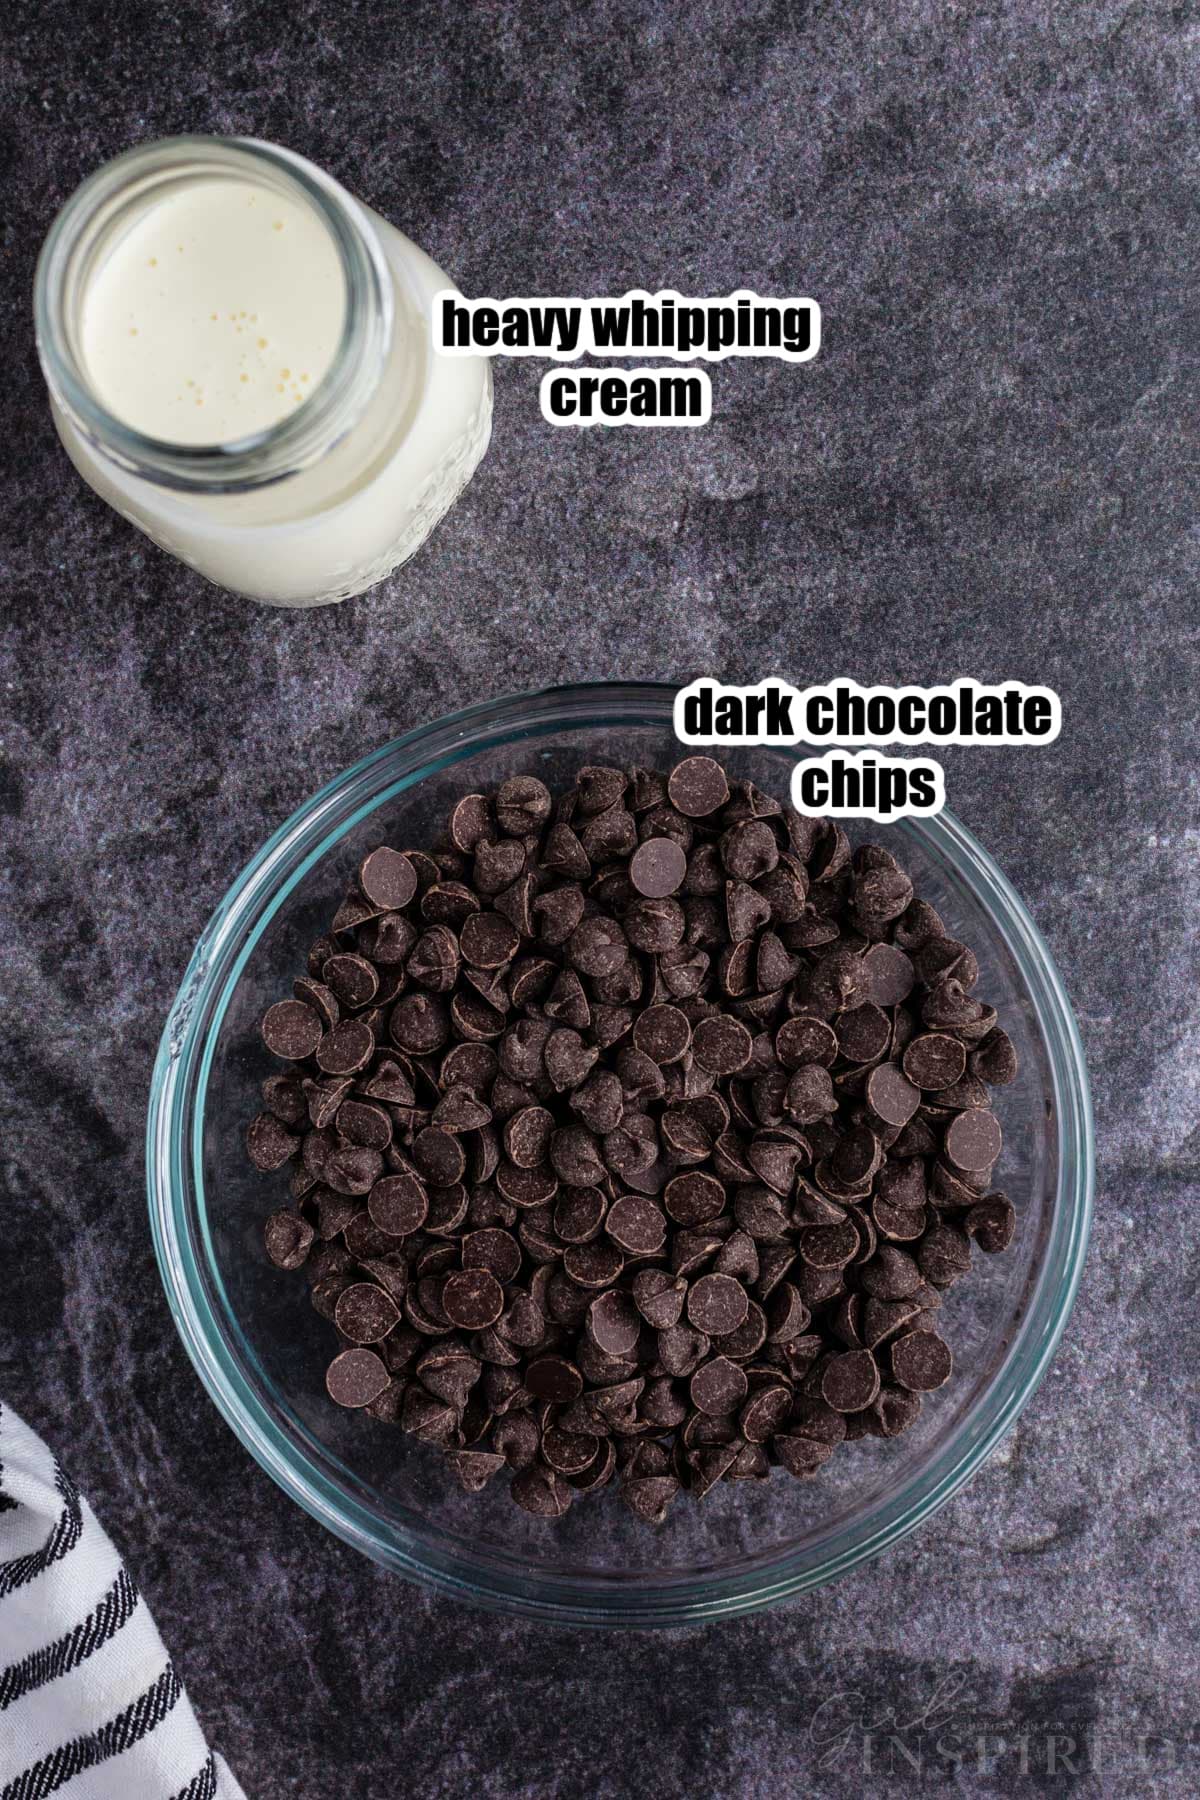 Dark chocolate chips in a bowl next to a cup of heavy whipping cream.